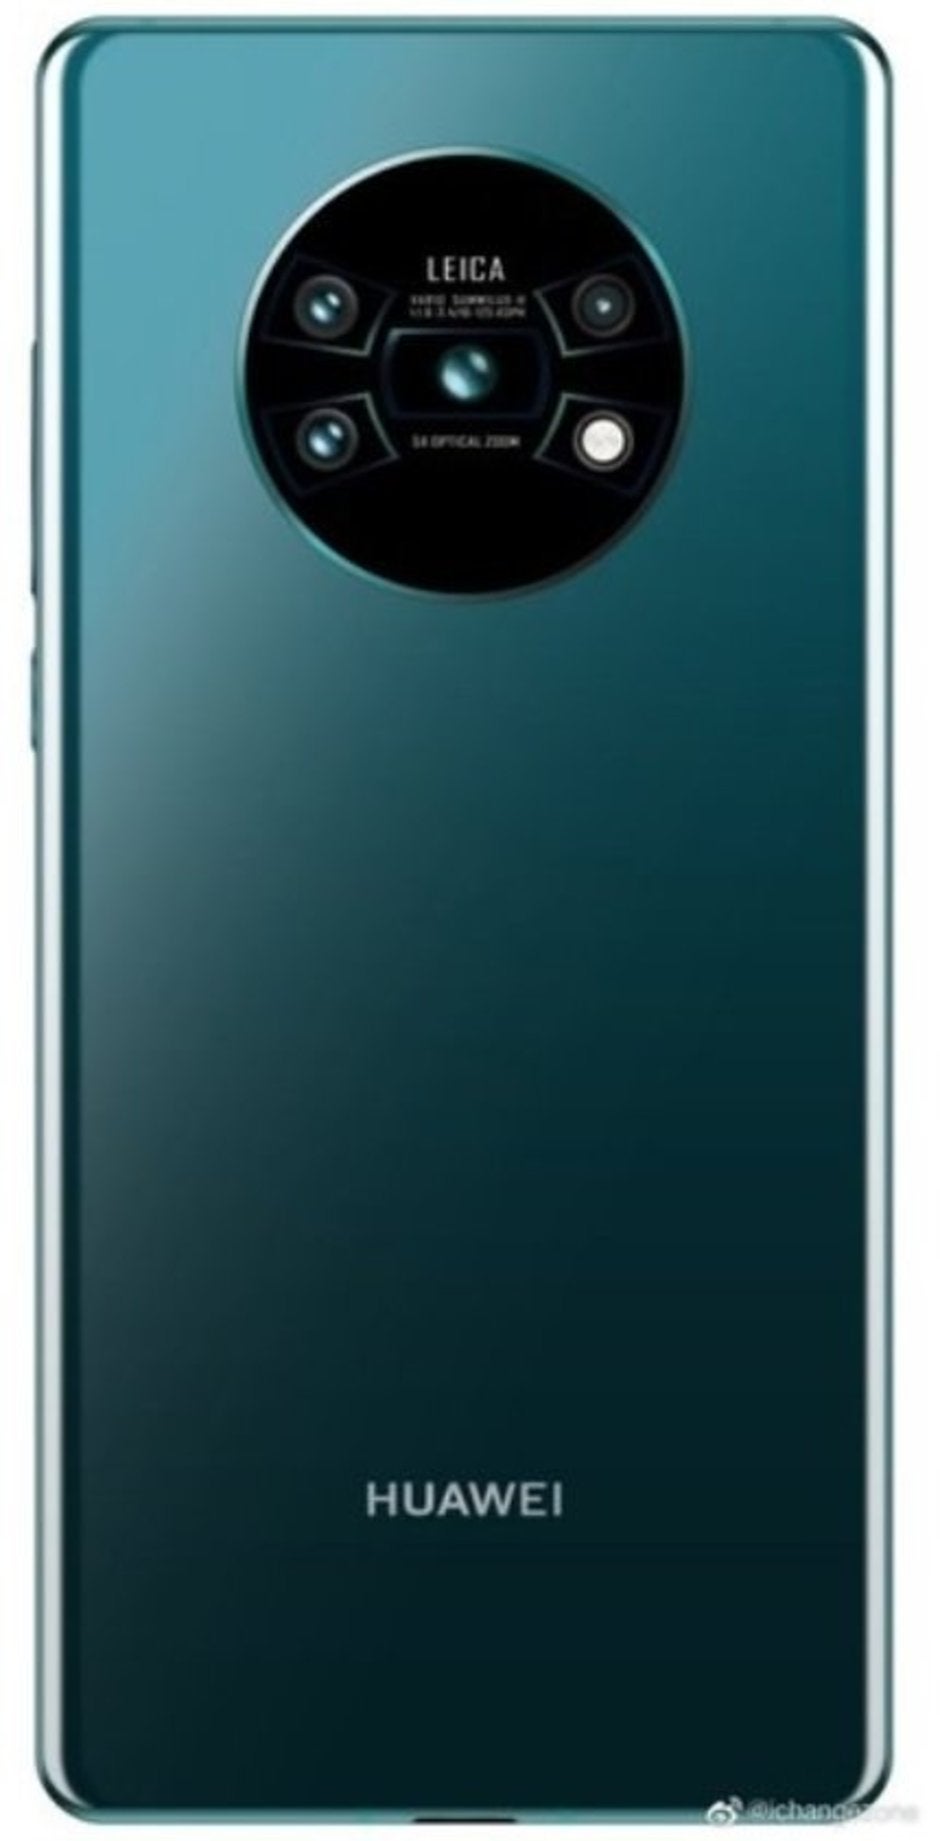 Render allegedly showing the rear panel of the Huawei Mate 30 Pro - Did Trump jump the gun when it comes to Huawei? Google's silence "says" it all